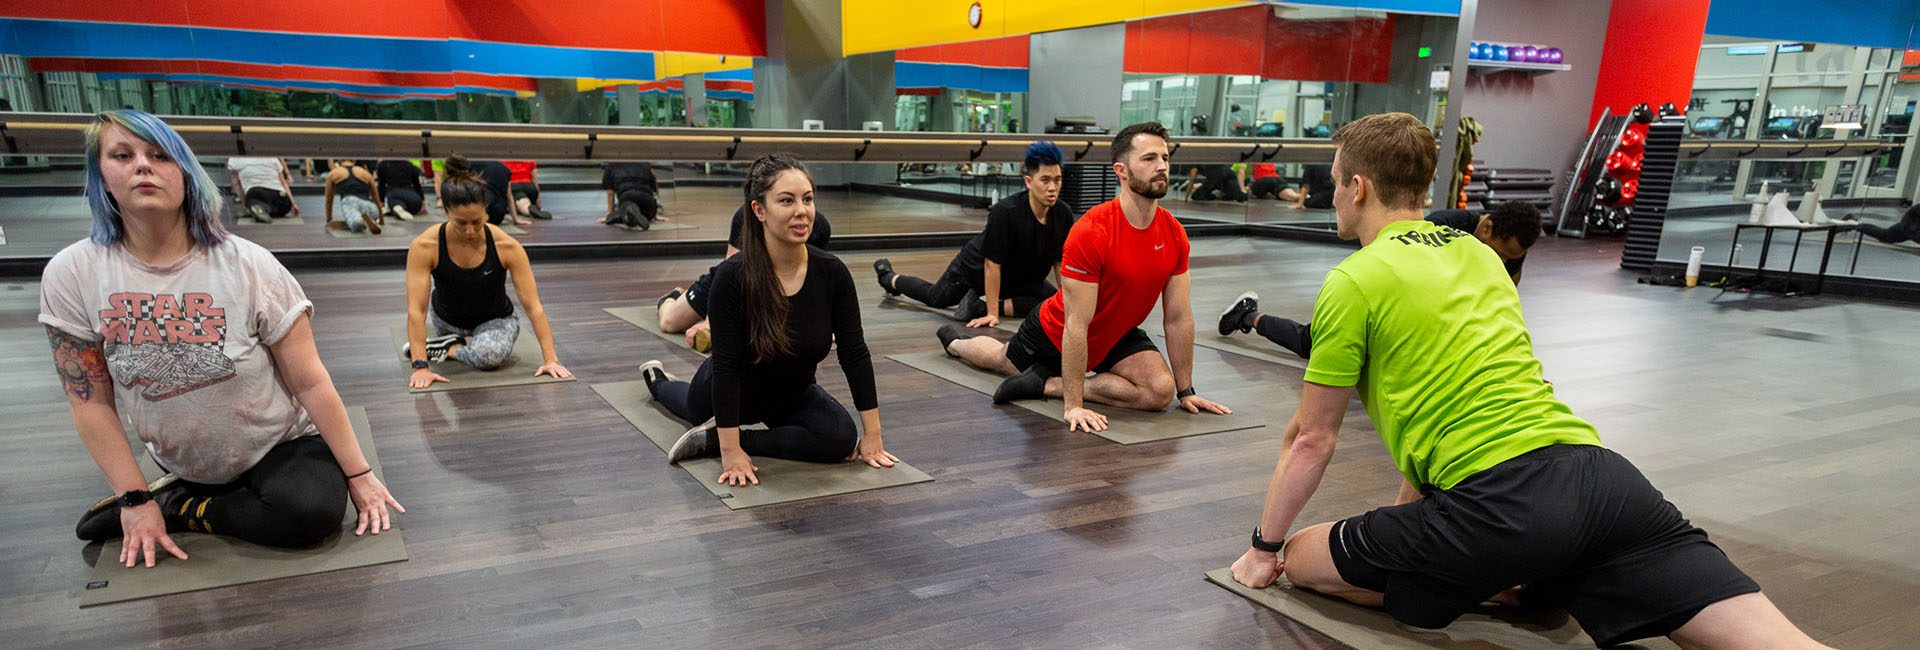 group of people doing a yoga pose in a class